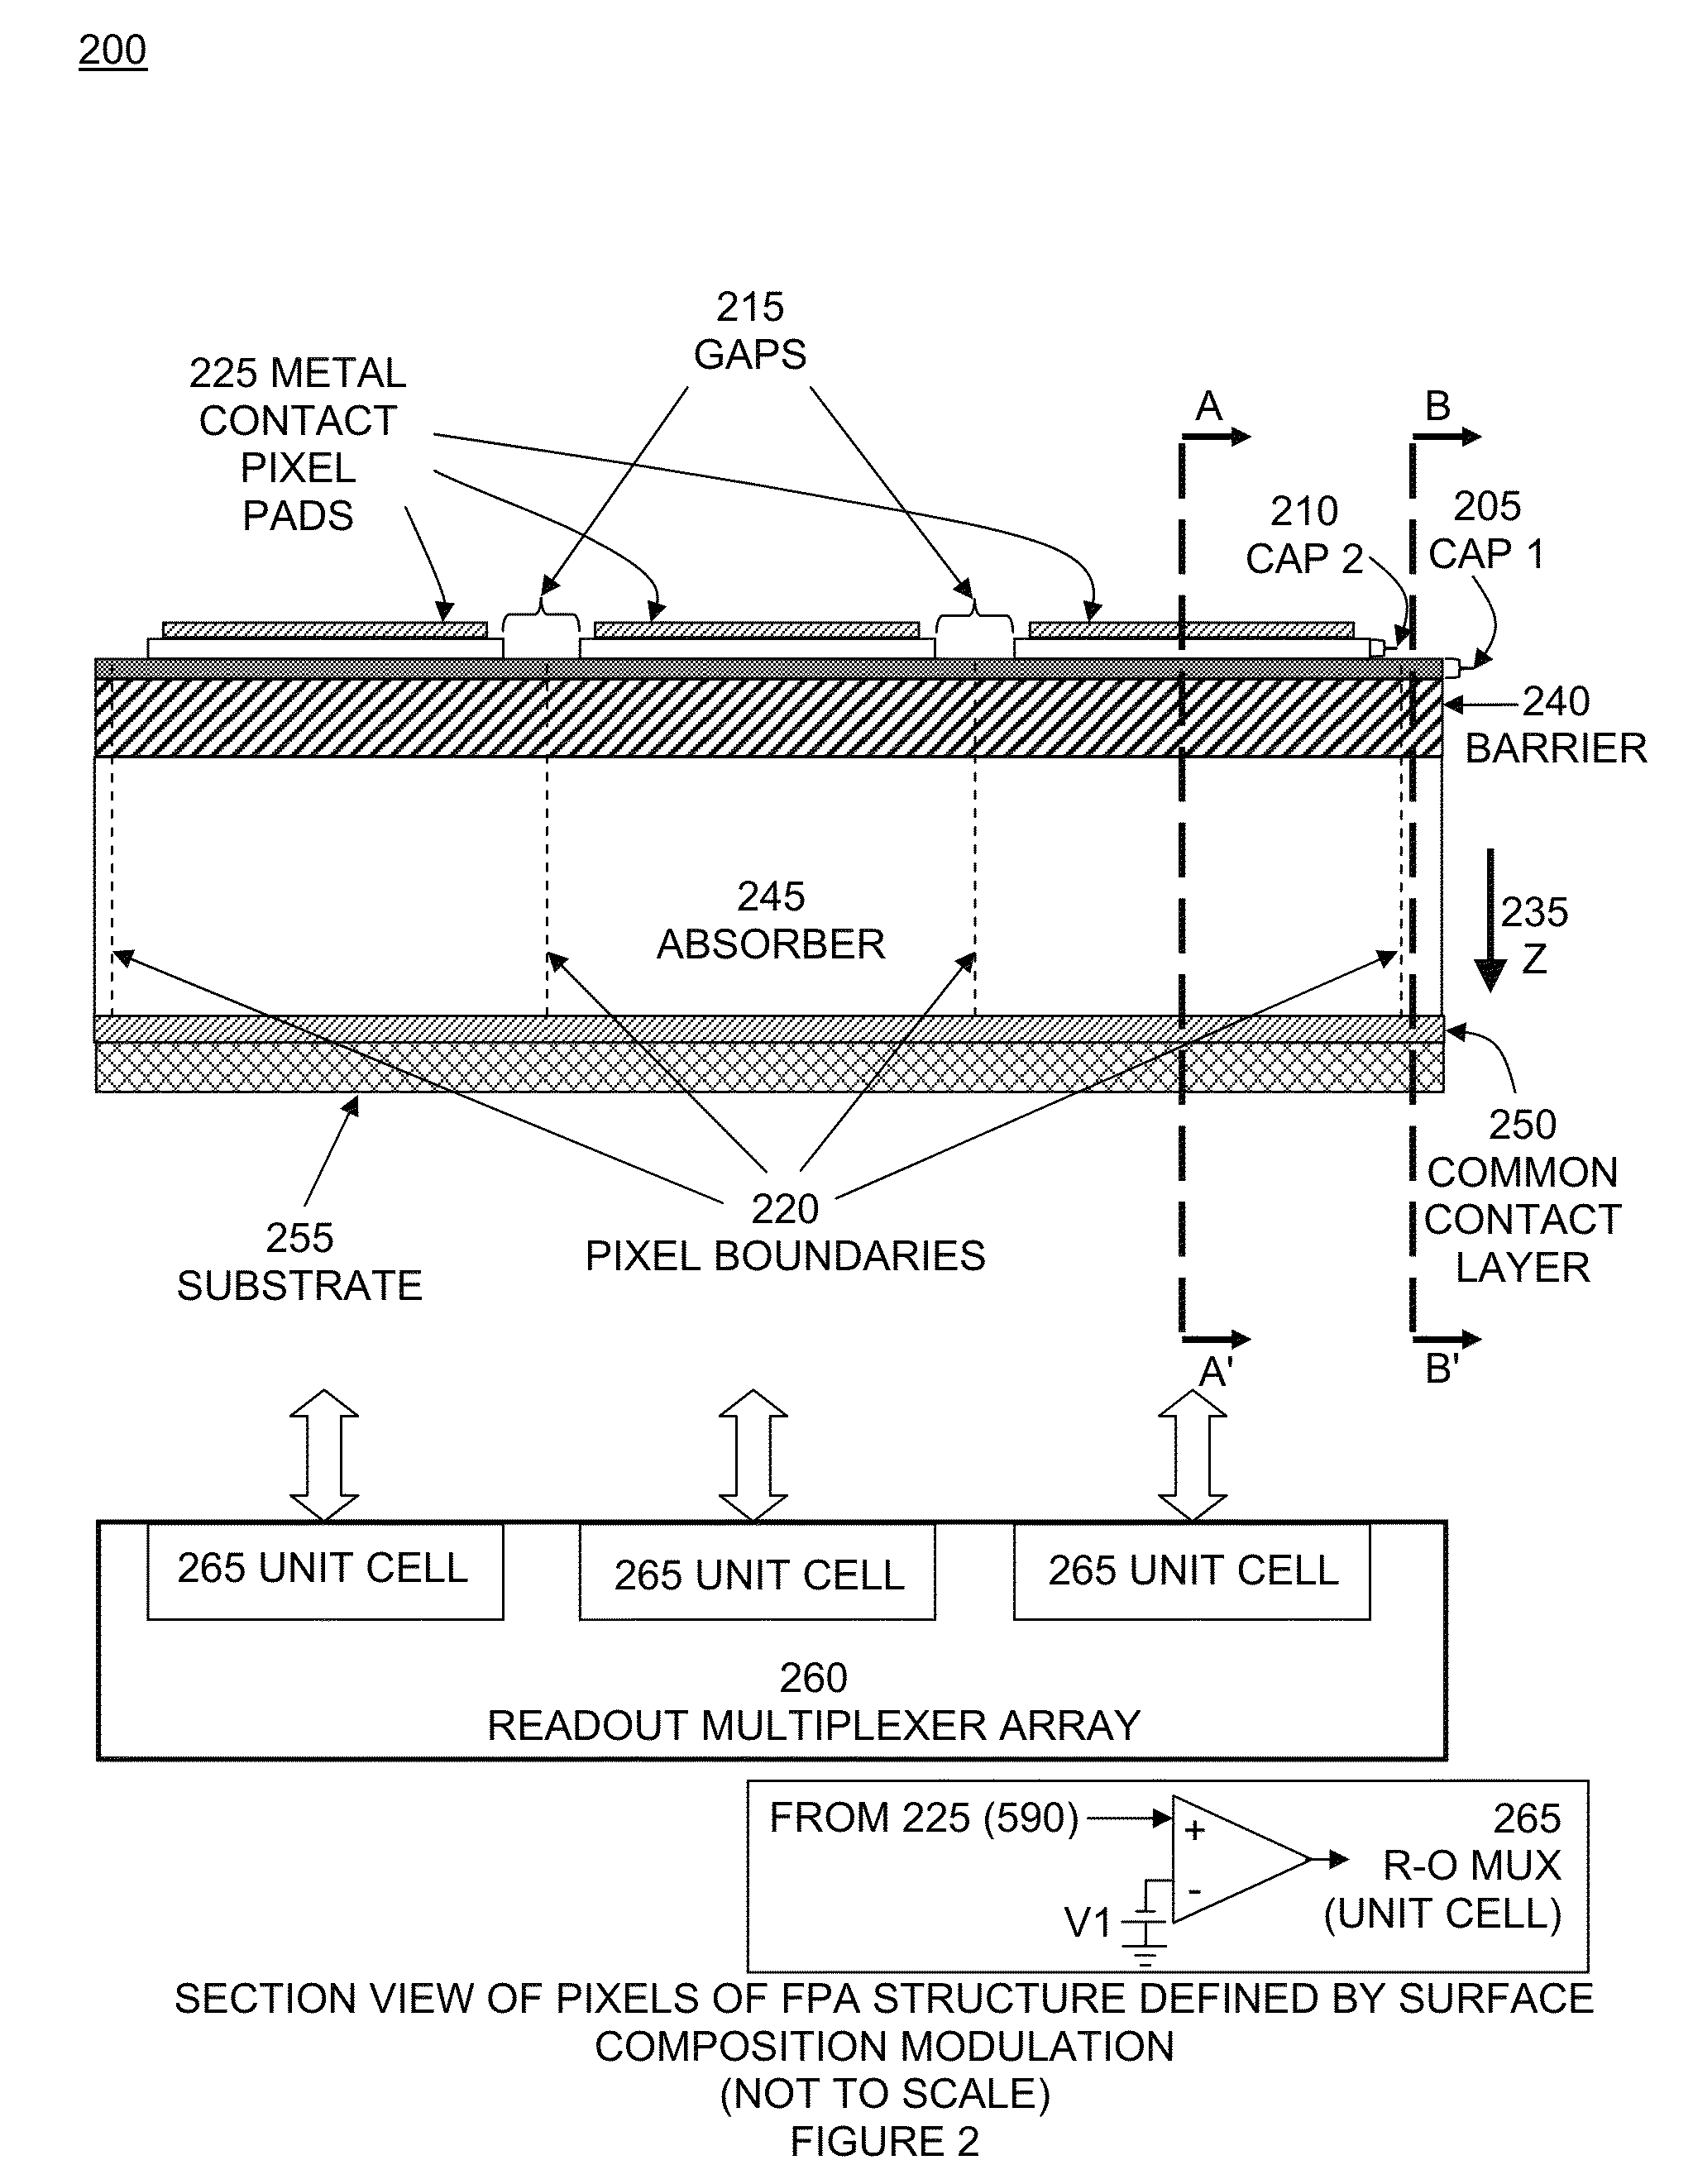 Focal plane array with pixels defined by modulation of surface Fermi energy